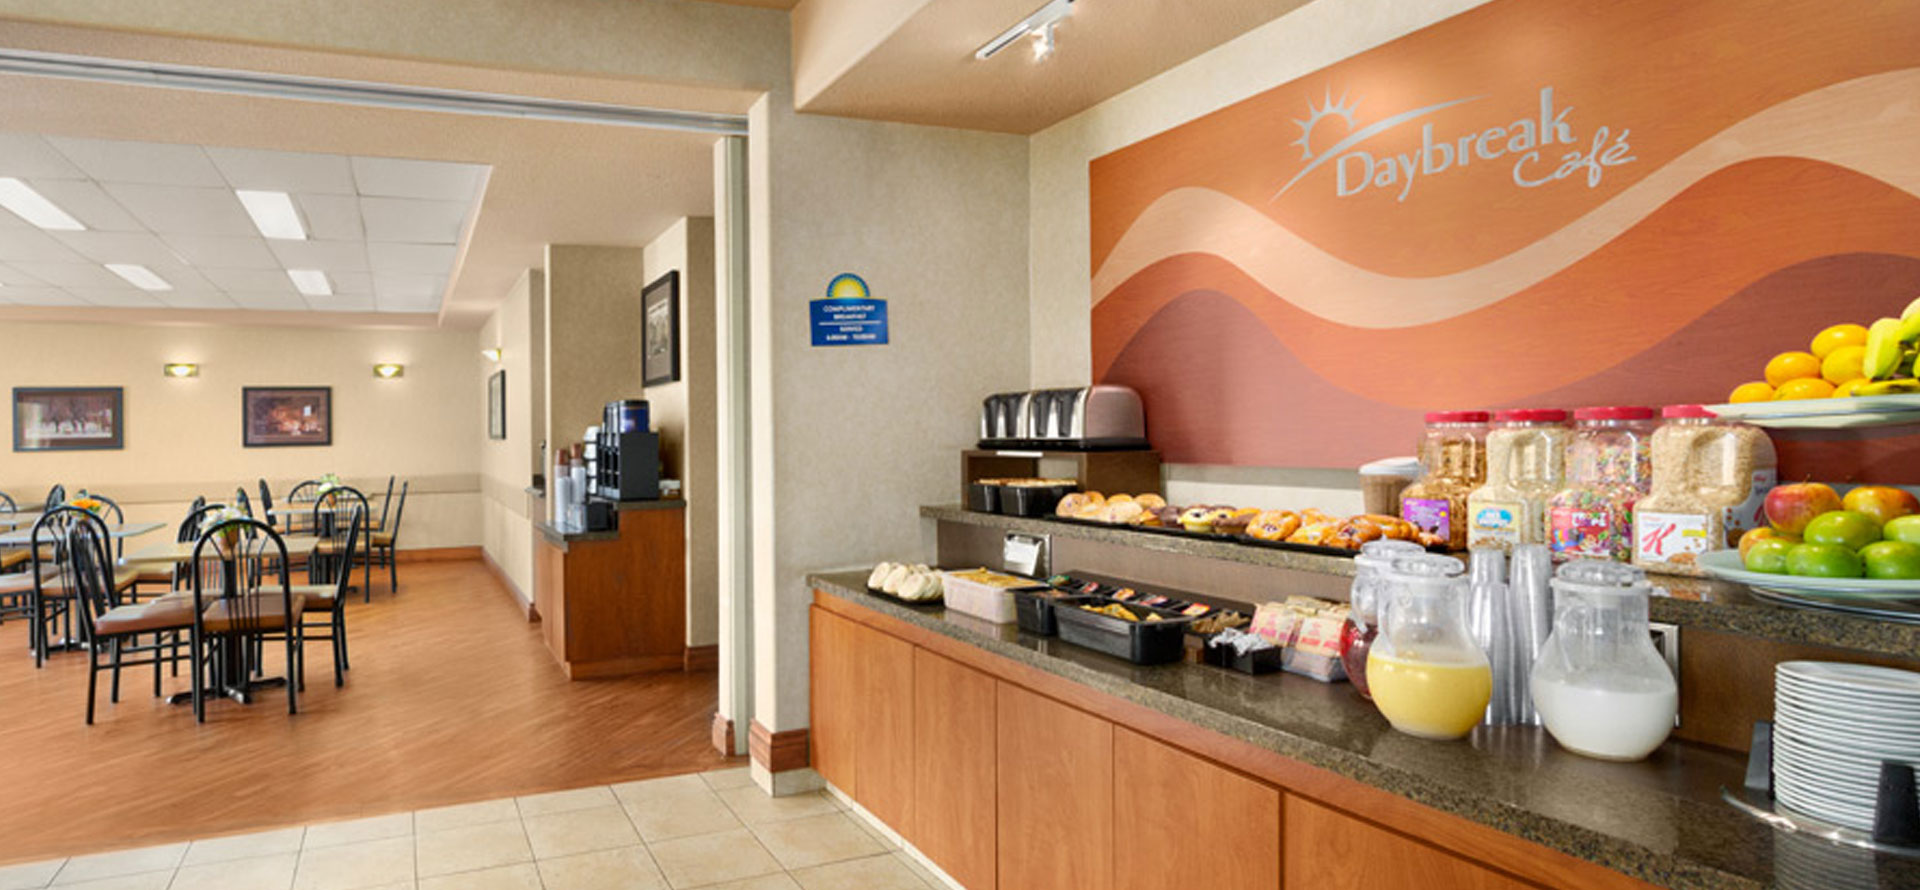 Large view of the breakfast room at Days Inn Red Deer, Alberta overlooking the stocked breakfast bar, coffee kiosk and dining area.
